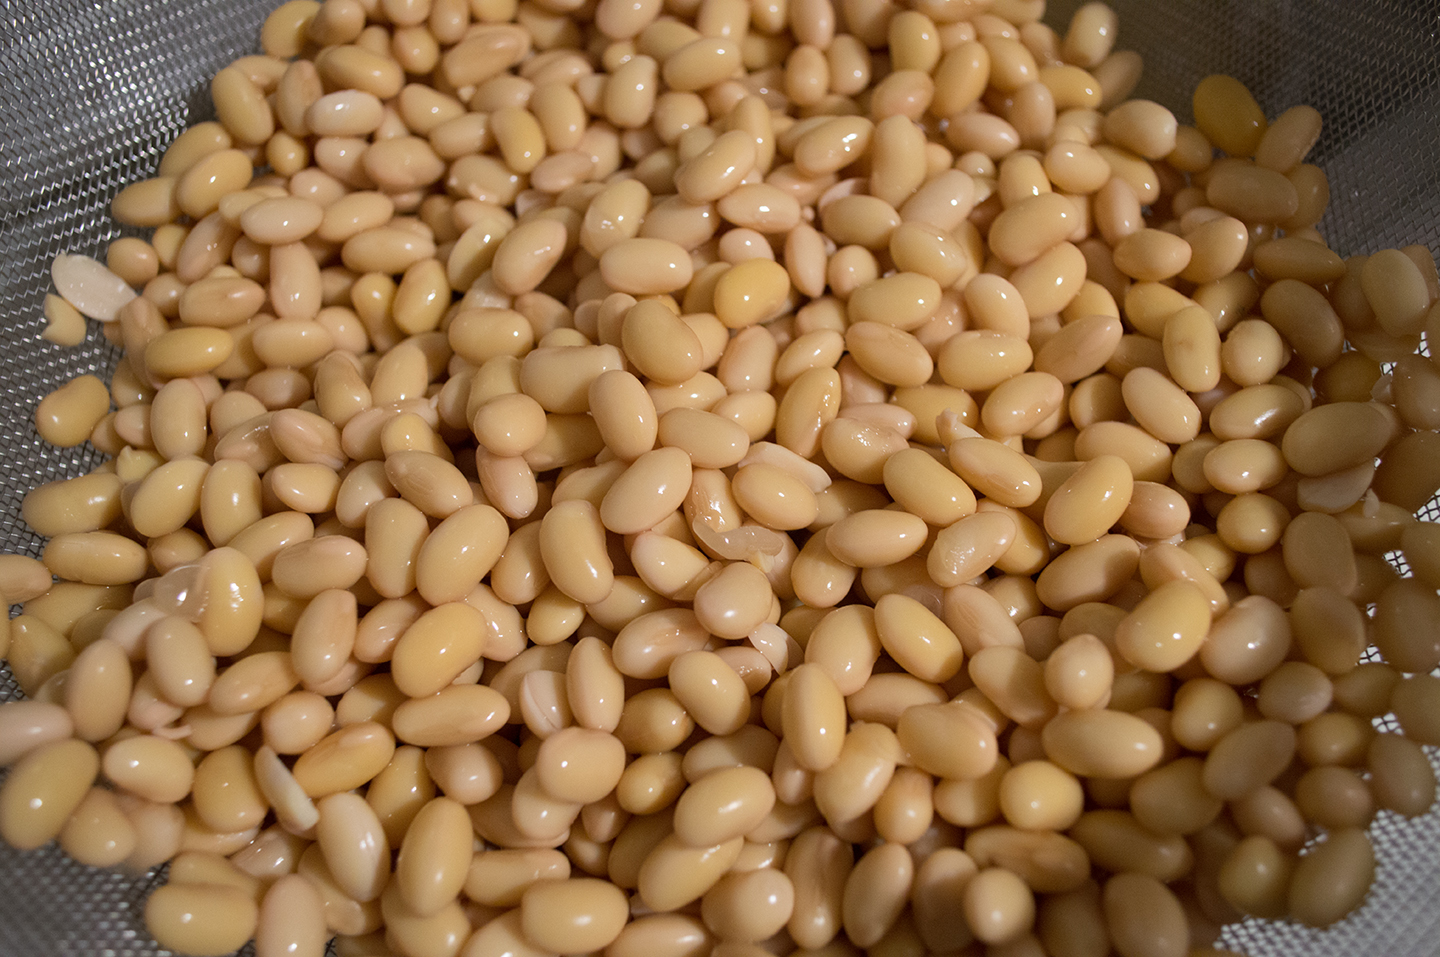 Soy Milk and Soy Pulp - Cooked Soybeans